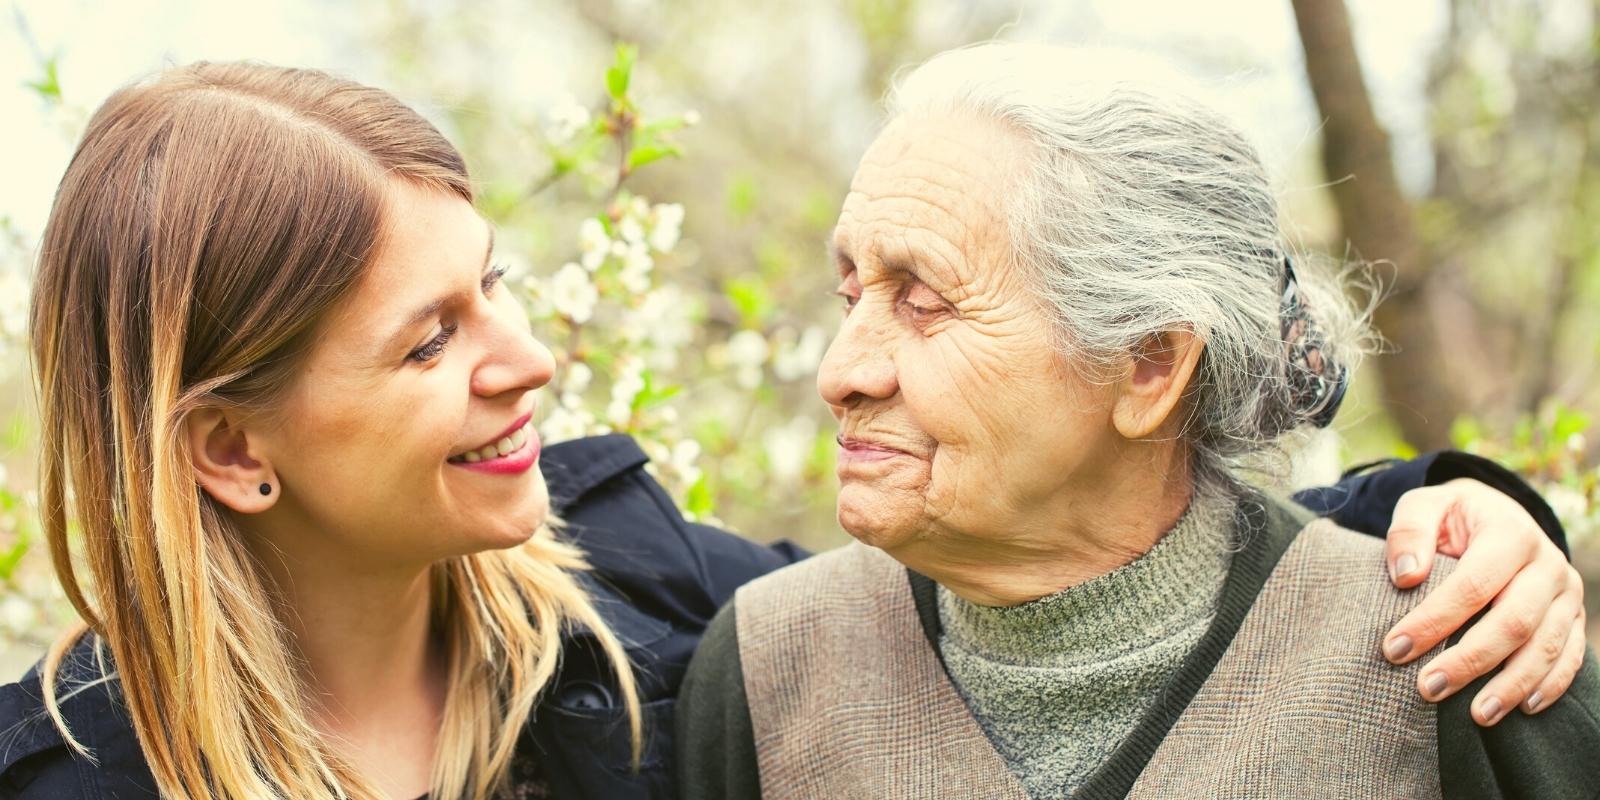 How To Get Help For A Parent With Dementia?